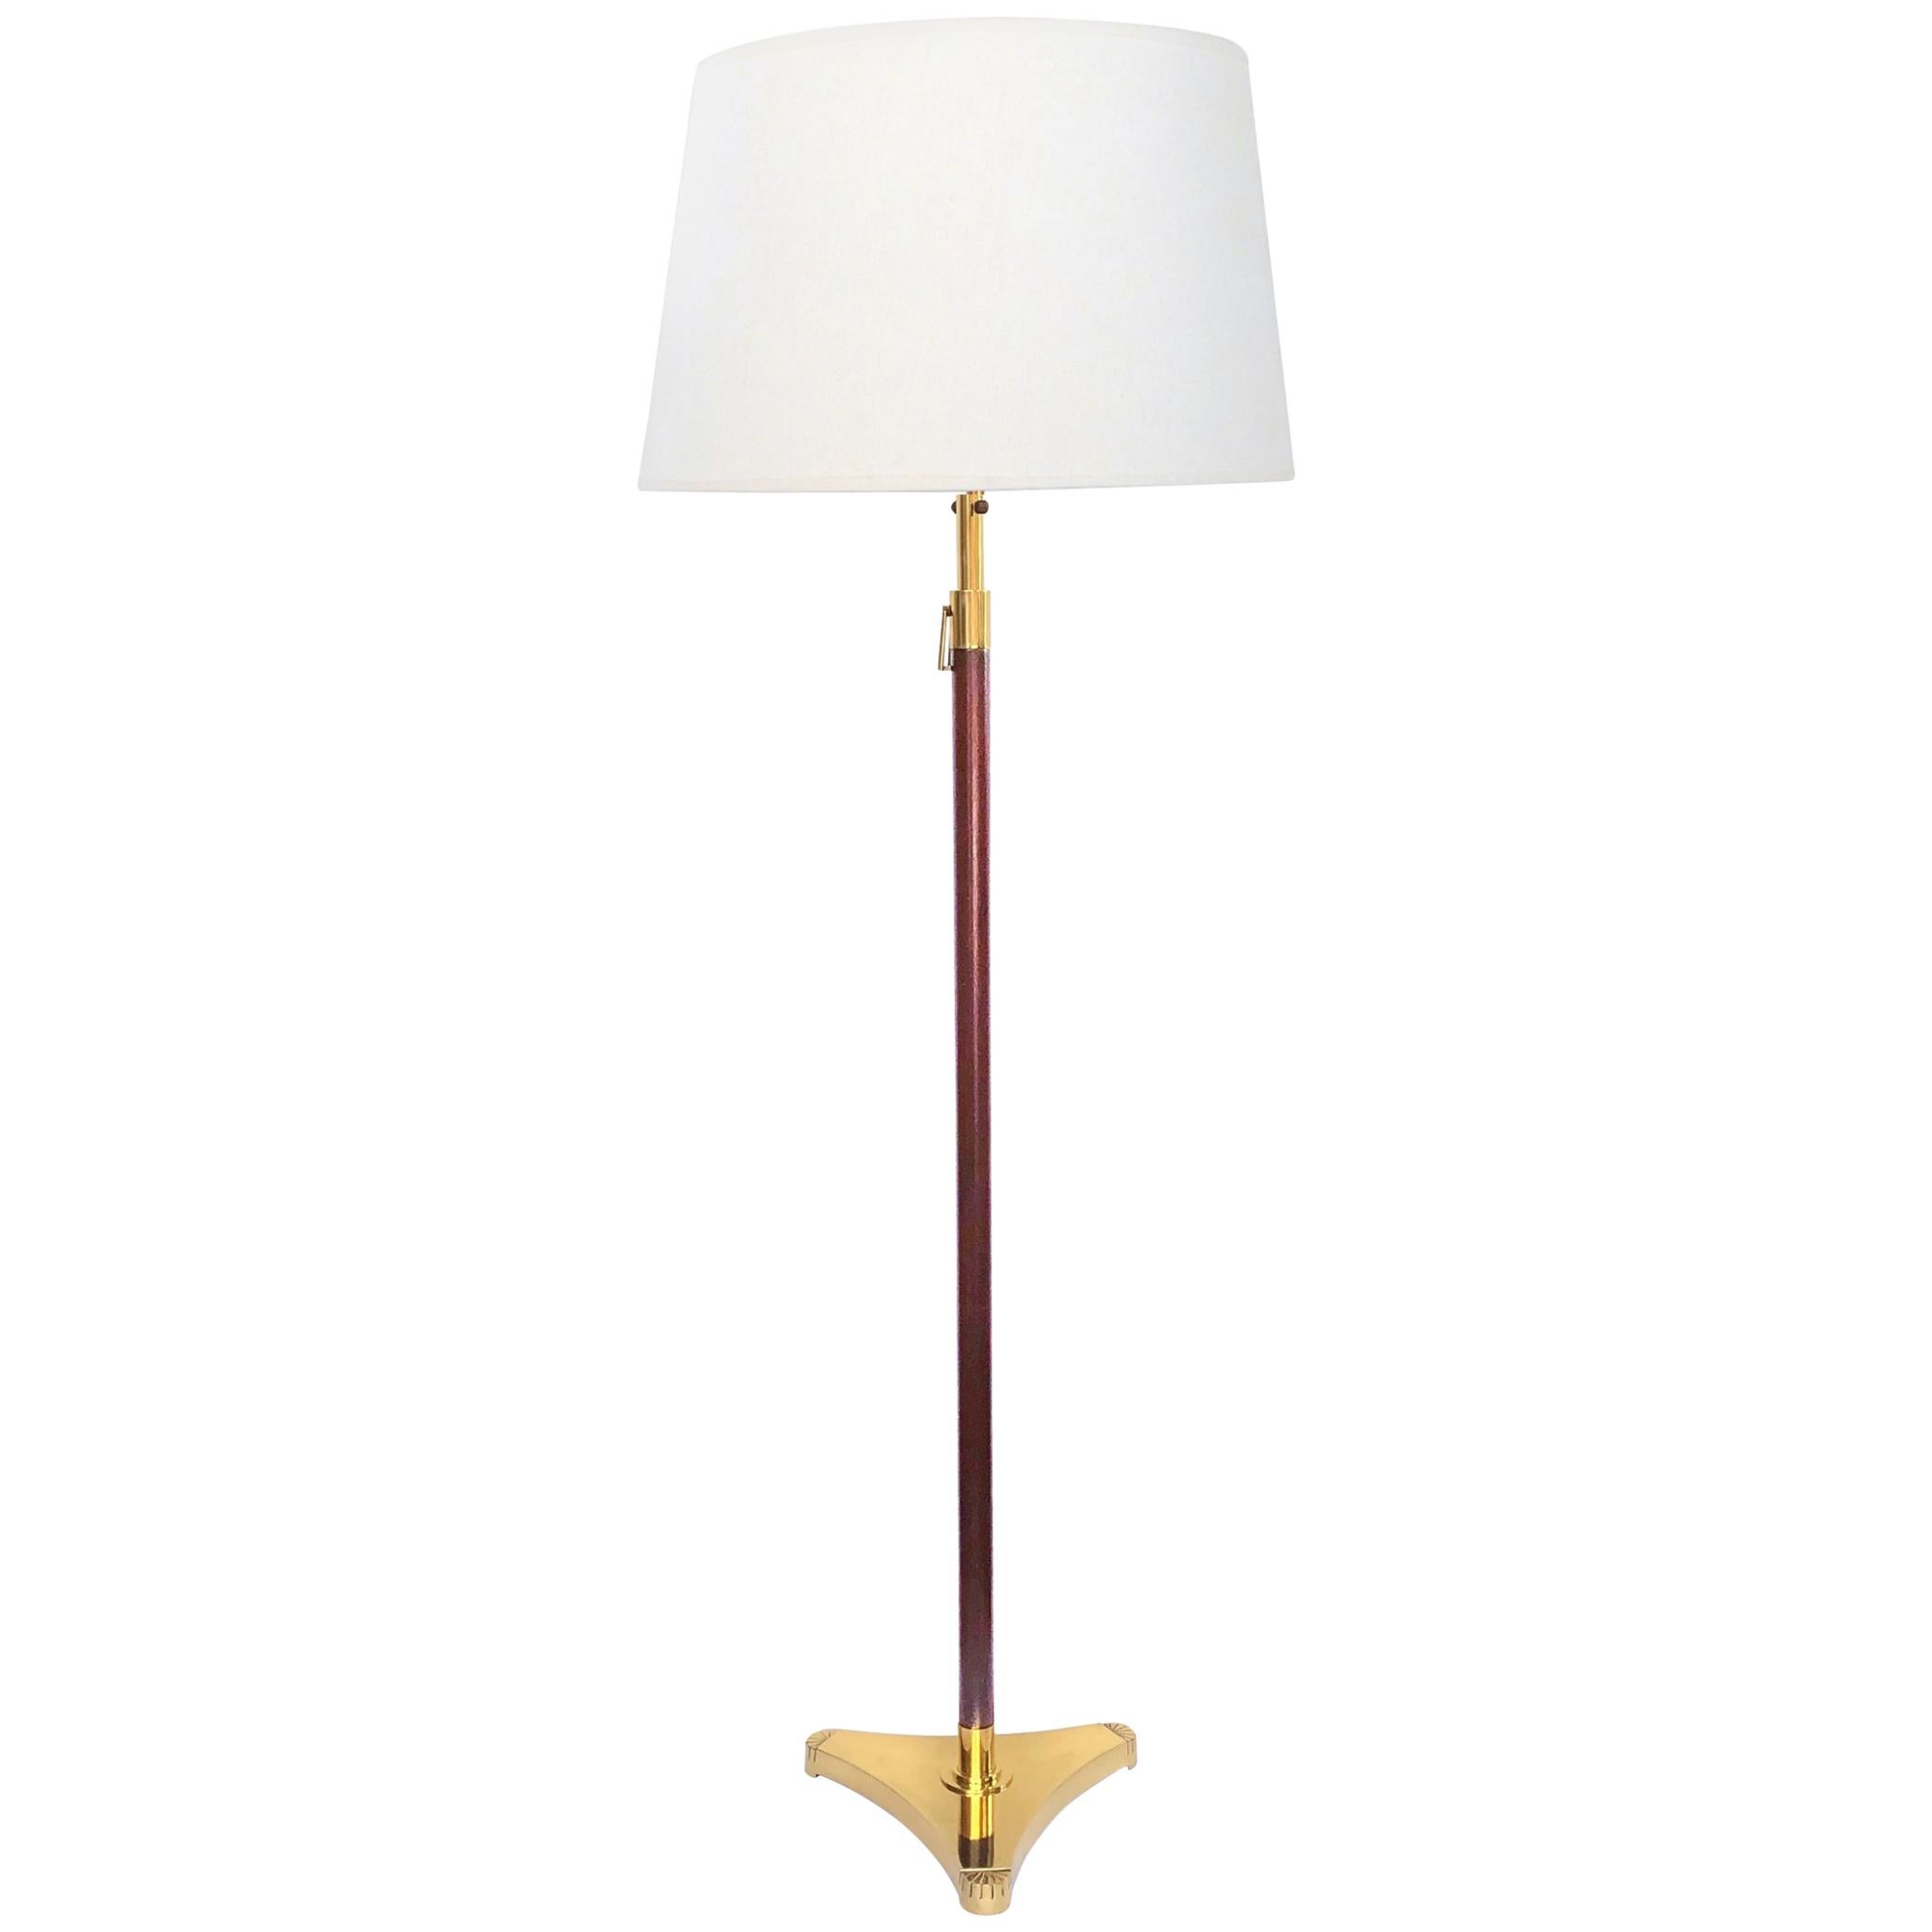 Handsome Art Deco Style Mahogany and Brass Adjustable Floor Lamp